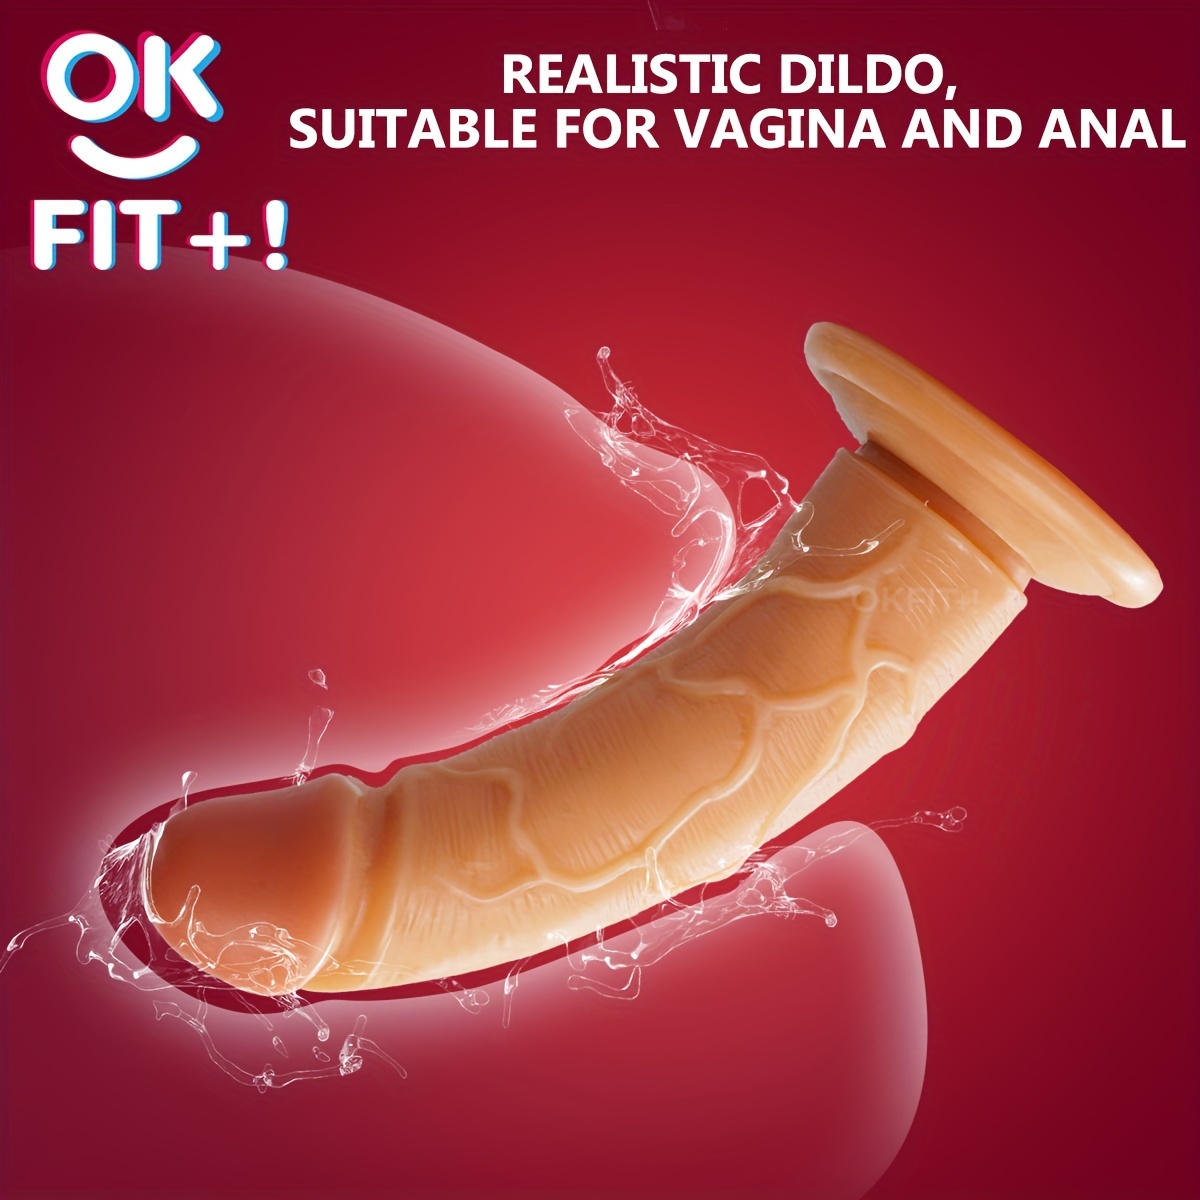 Realistic Dildo With Powerful Suction Cup For Hands-free Play,, Silicone Lifelike Dildo, Flexible G Spot Anal Butt Plug, Adult Sex Toys For Men Women Couples picture